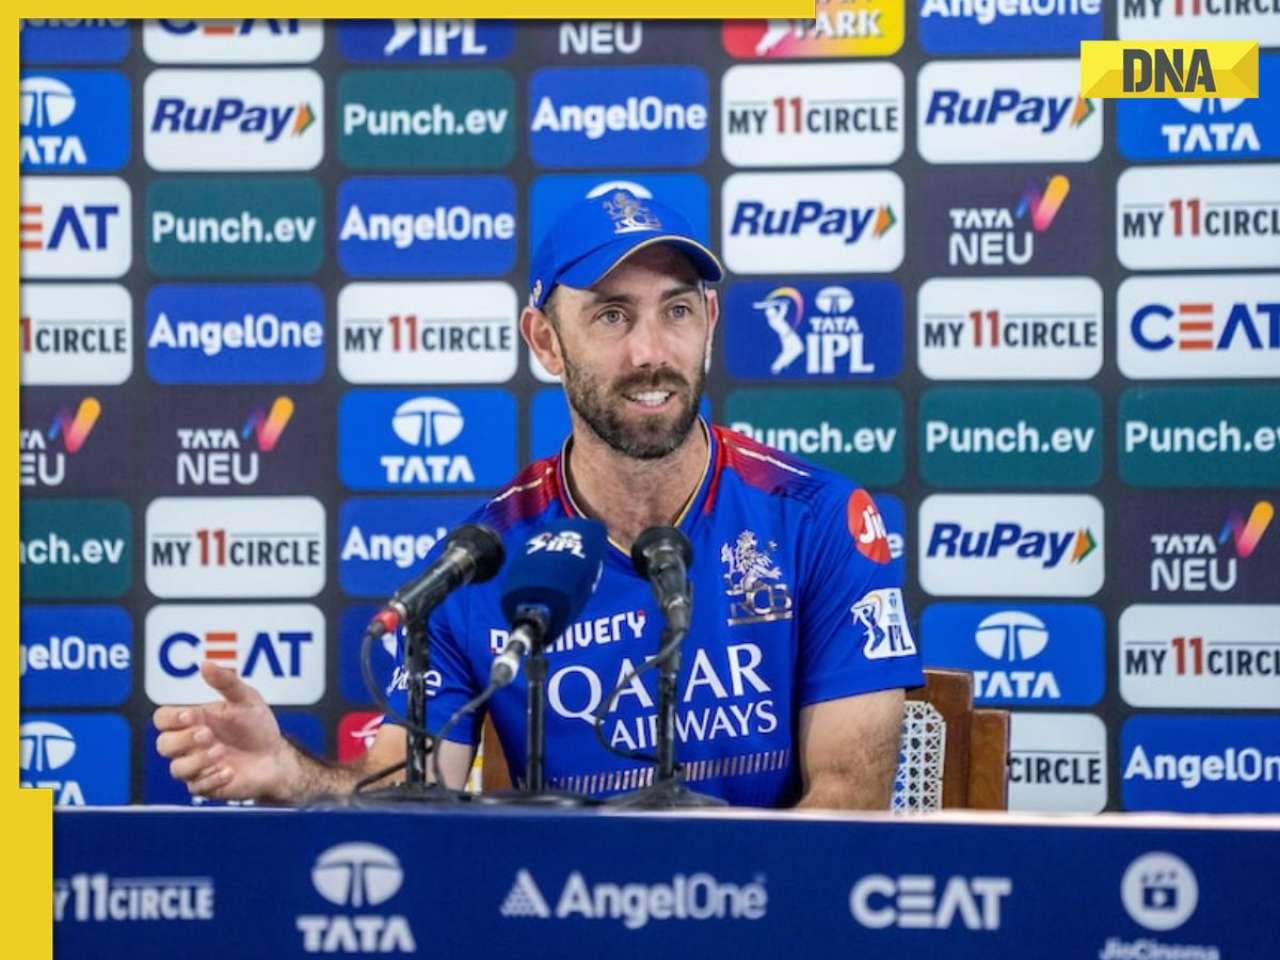 'I went to...': Glenn Maxwell reveals why he was left out of RCB vs SRH clash